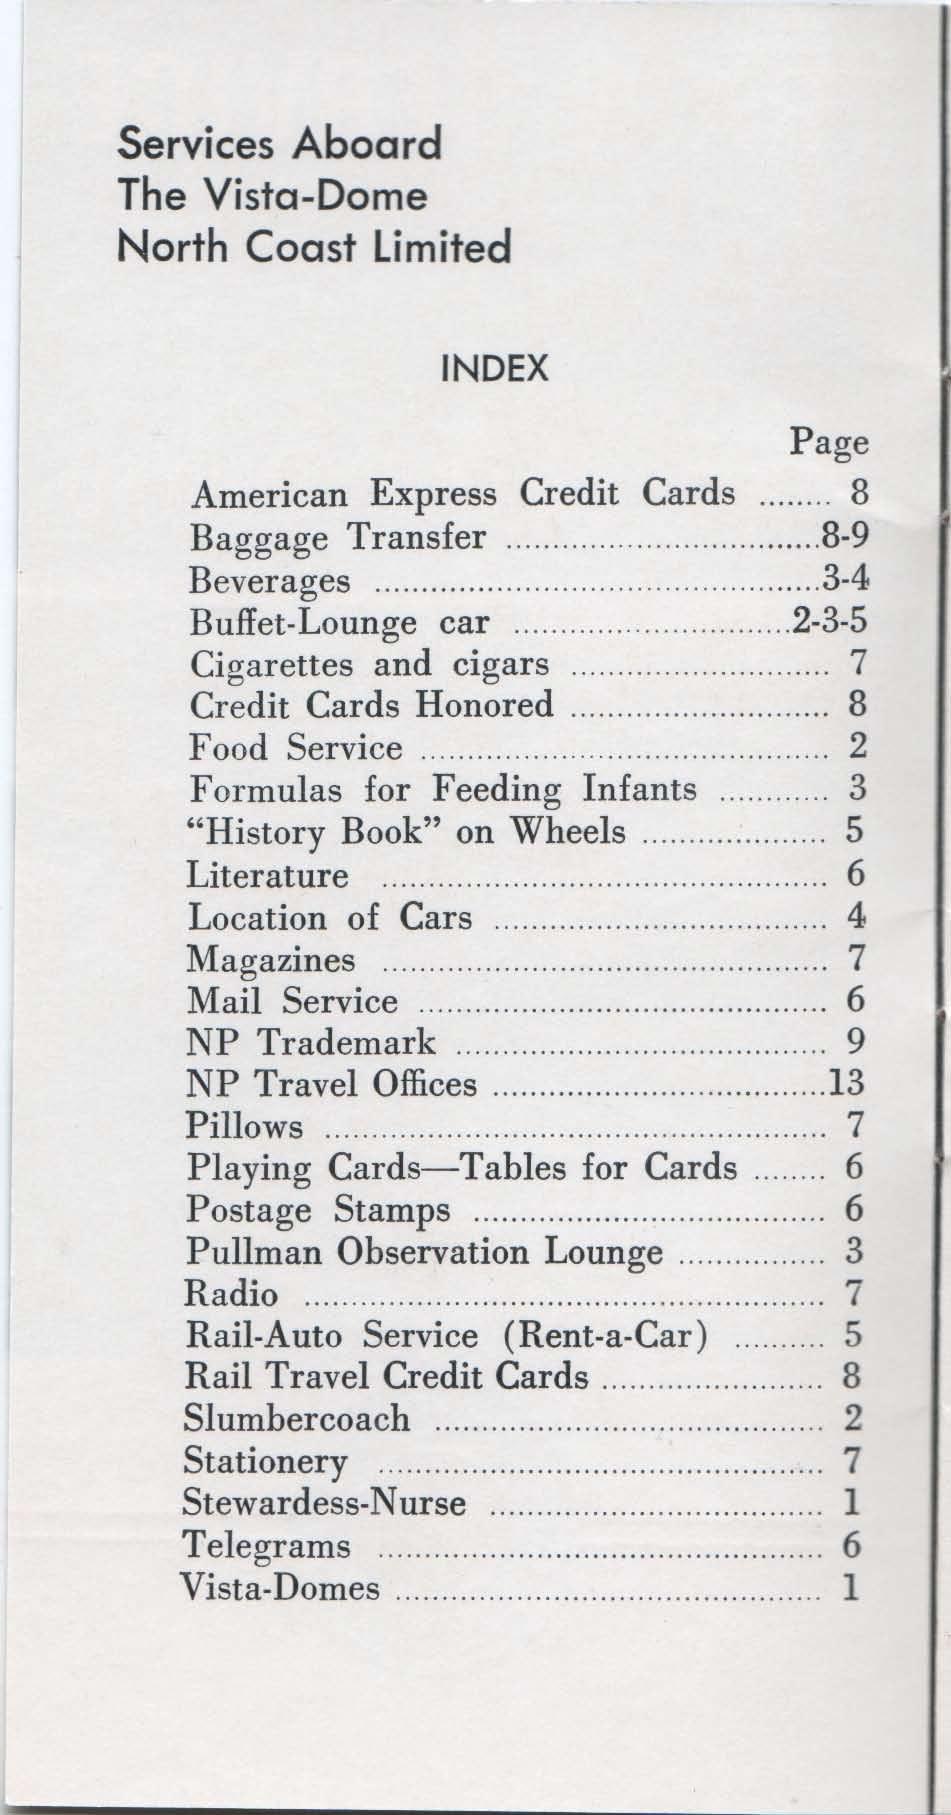 Services Aboard The Vista-Dome North Coast Limited INDEX Page American Express Credit Cards 8 Baggage Transfer 8-9 Beverages 3-4 Buffet-Lounge car 2-3-5 Cigarettes and cigars 7 Credit Cards Honored 8